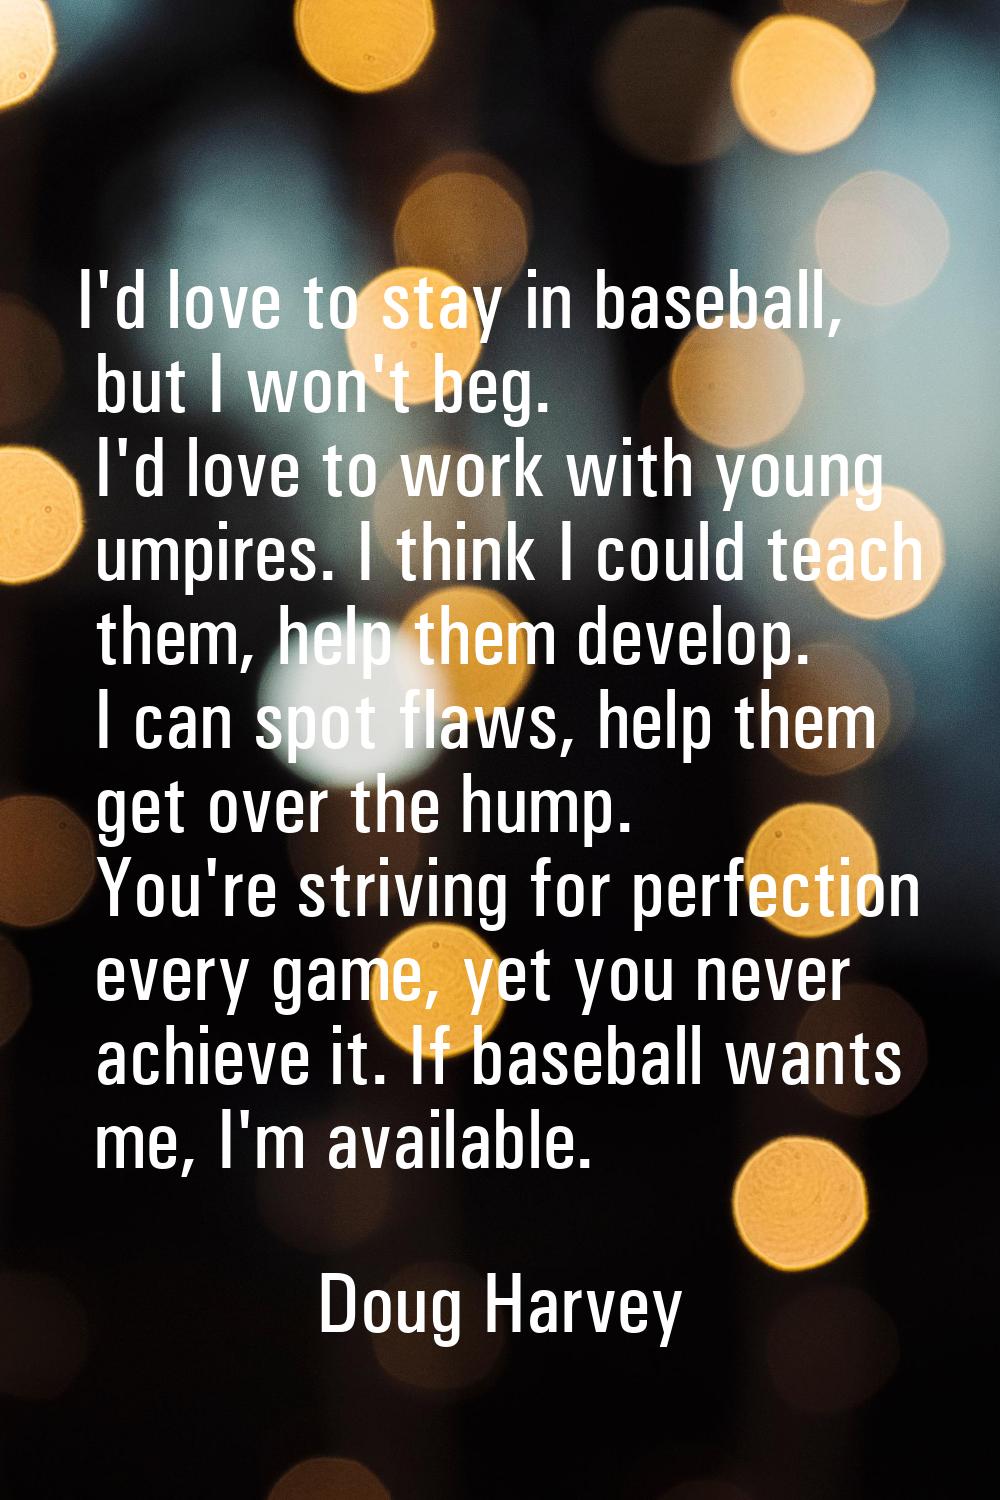 I'd love to stay in baseball, but I won't beg. I'd love to work with young umpires. I think I could